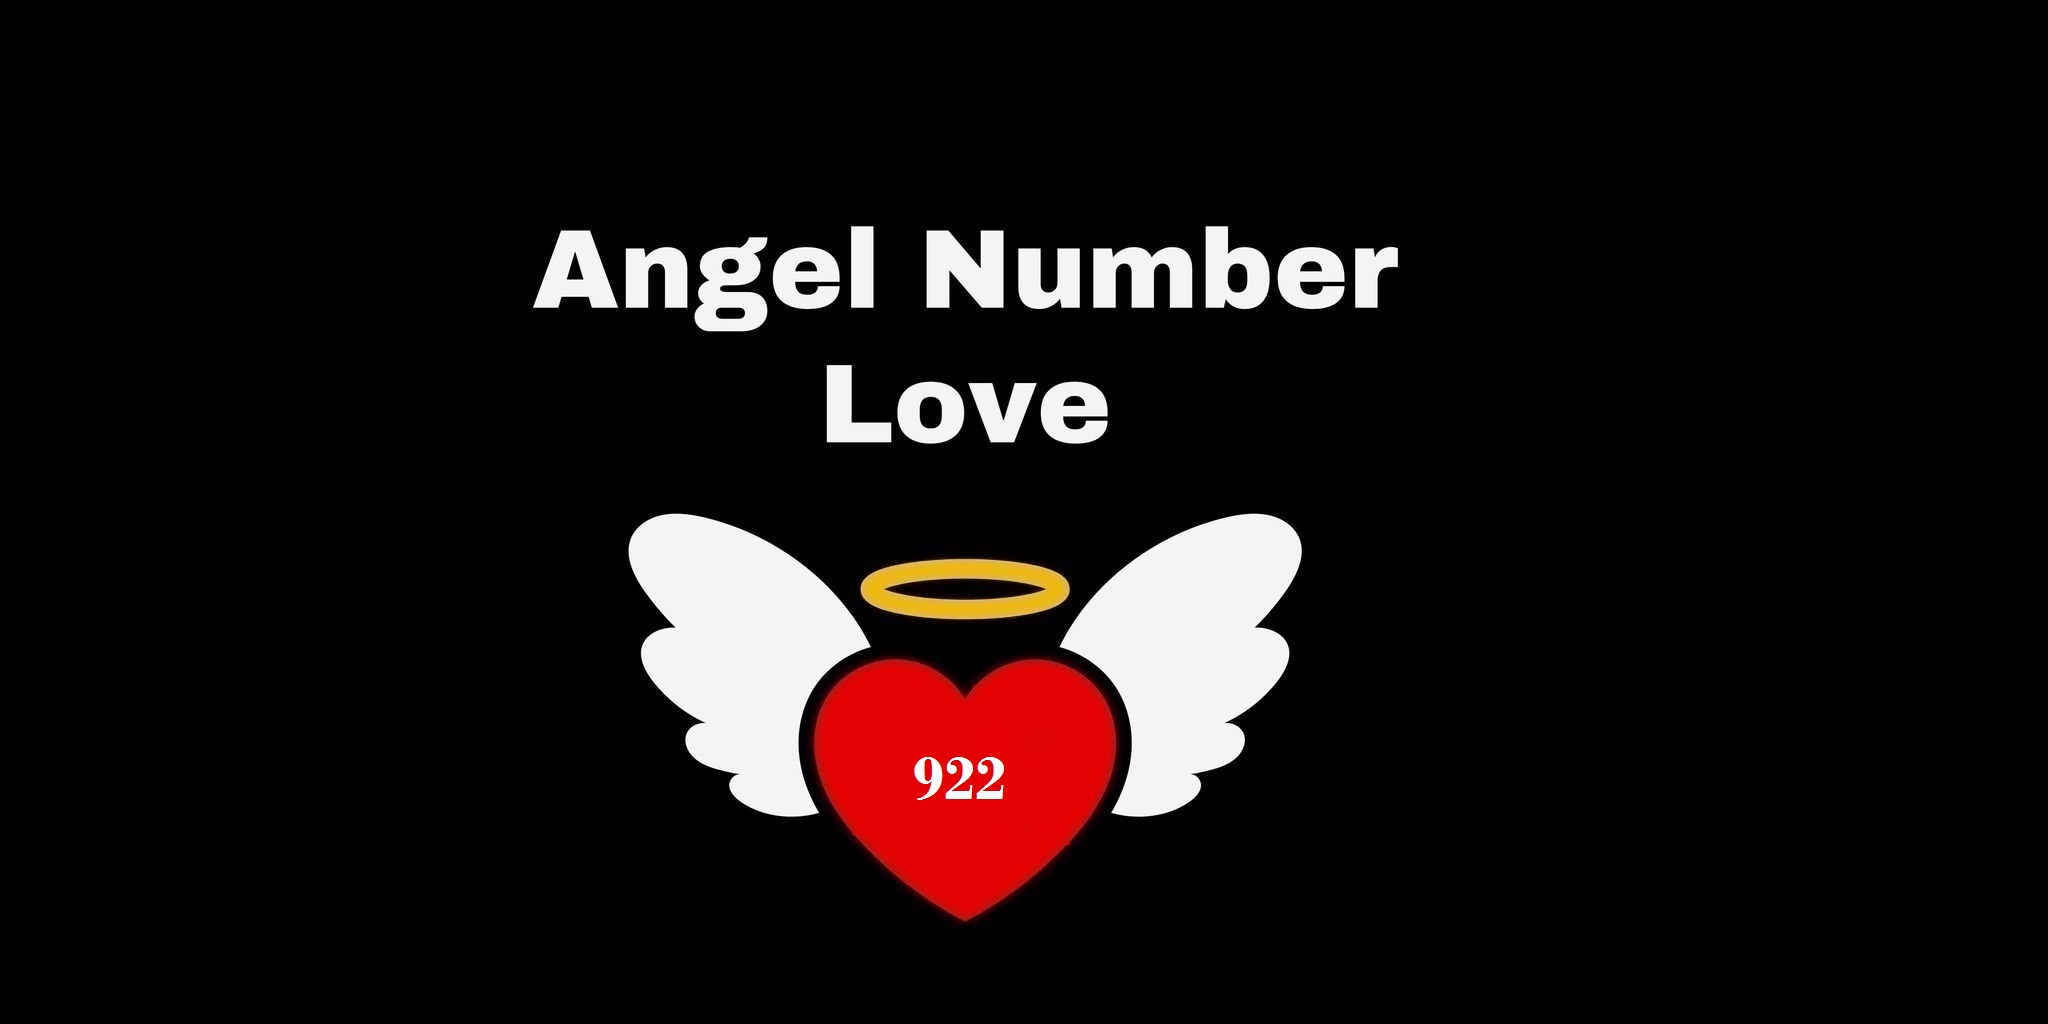 922 Angel Number Meaning In Love